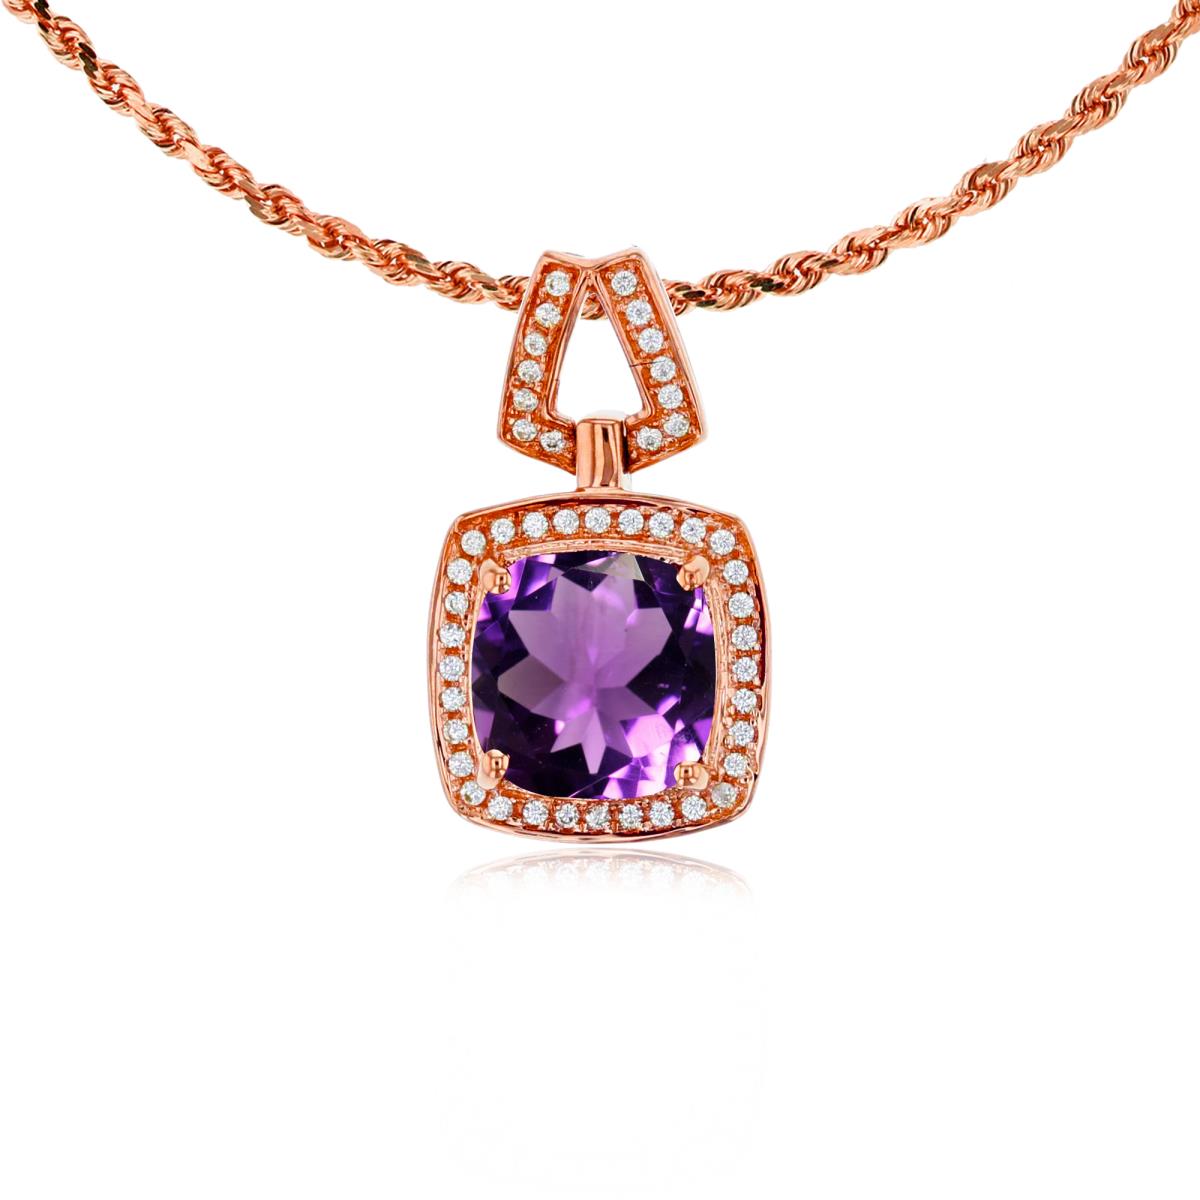 10K Rose Gold 7mm Cushion Amethyst & 0.10 CTTW Diamond Halo 18" Rope Chain Necklace